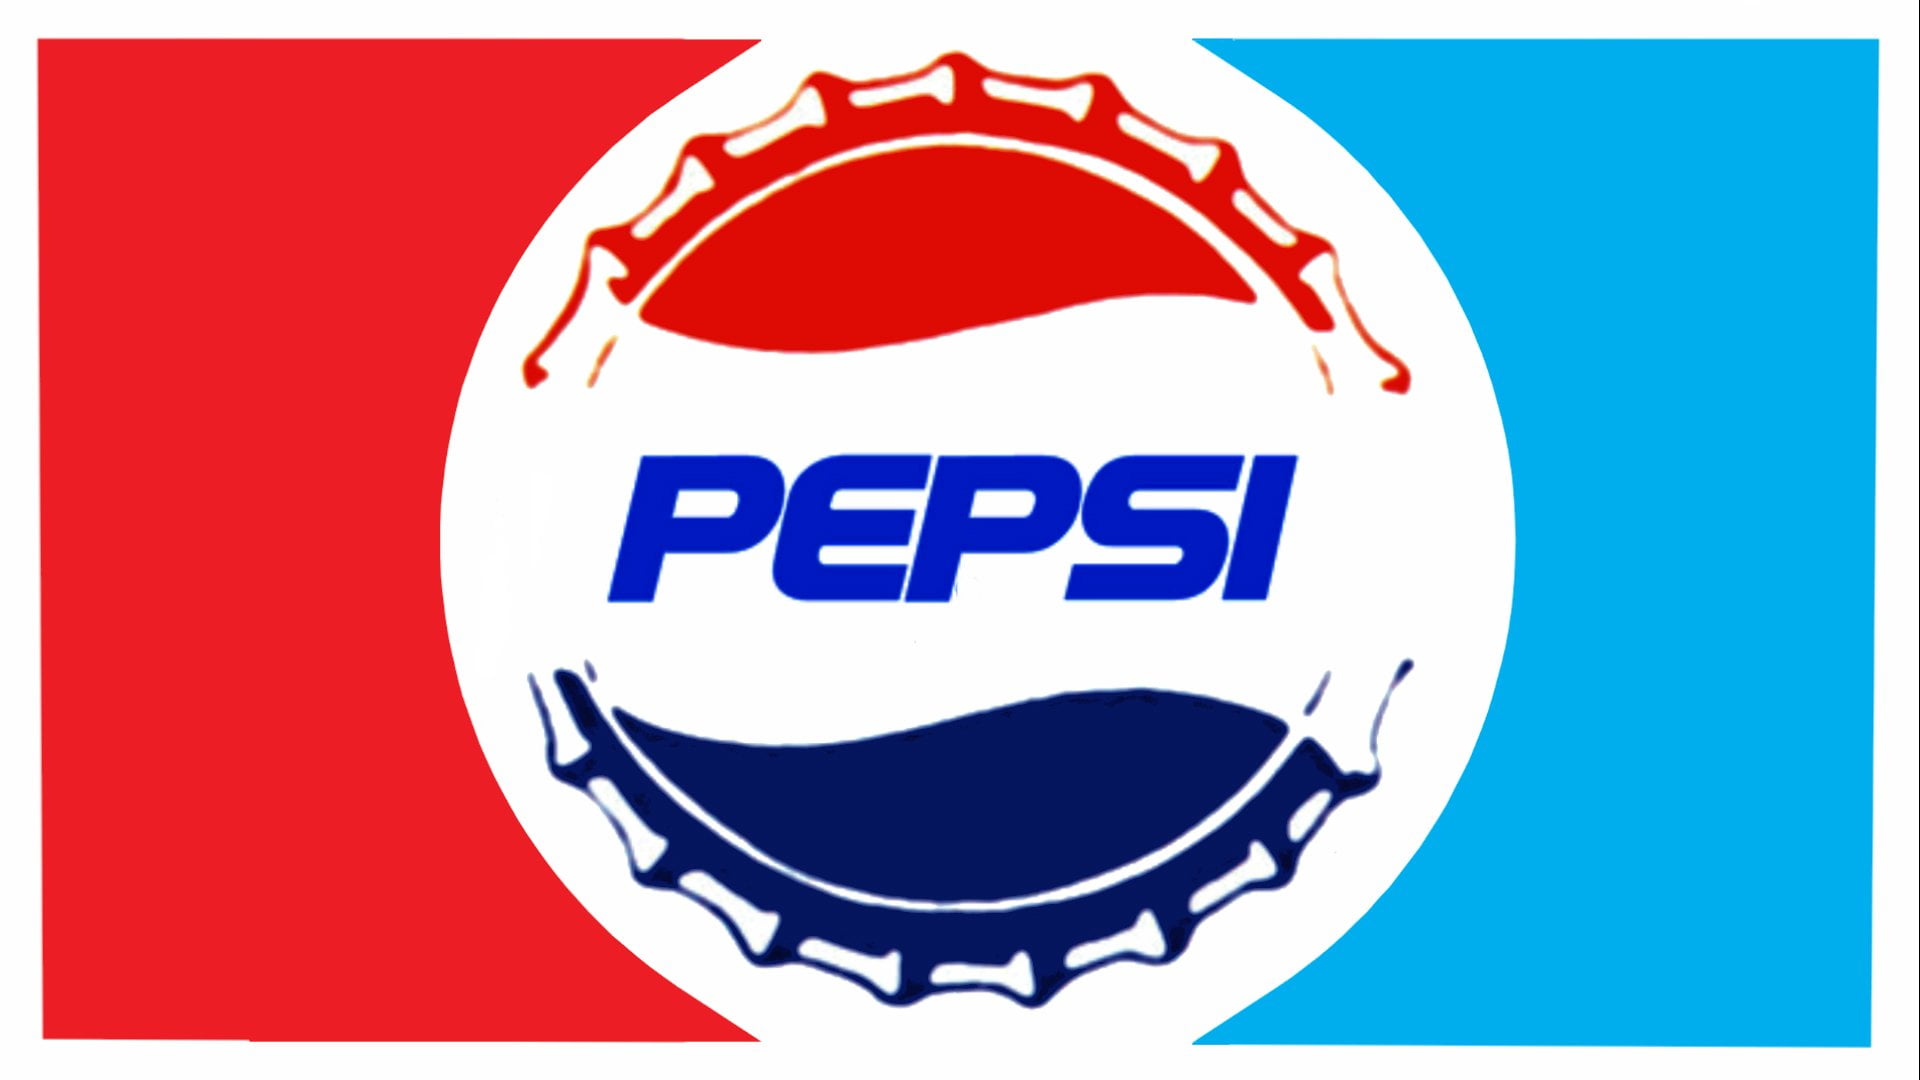 Products, Pepsi, blue, communication, red, sign, symbol, people